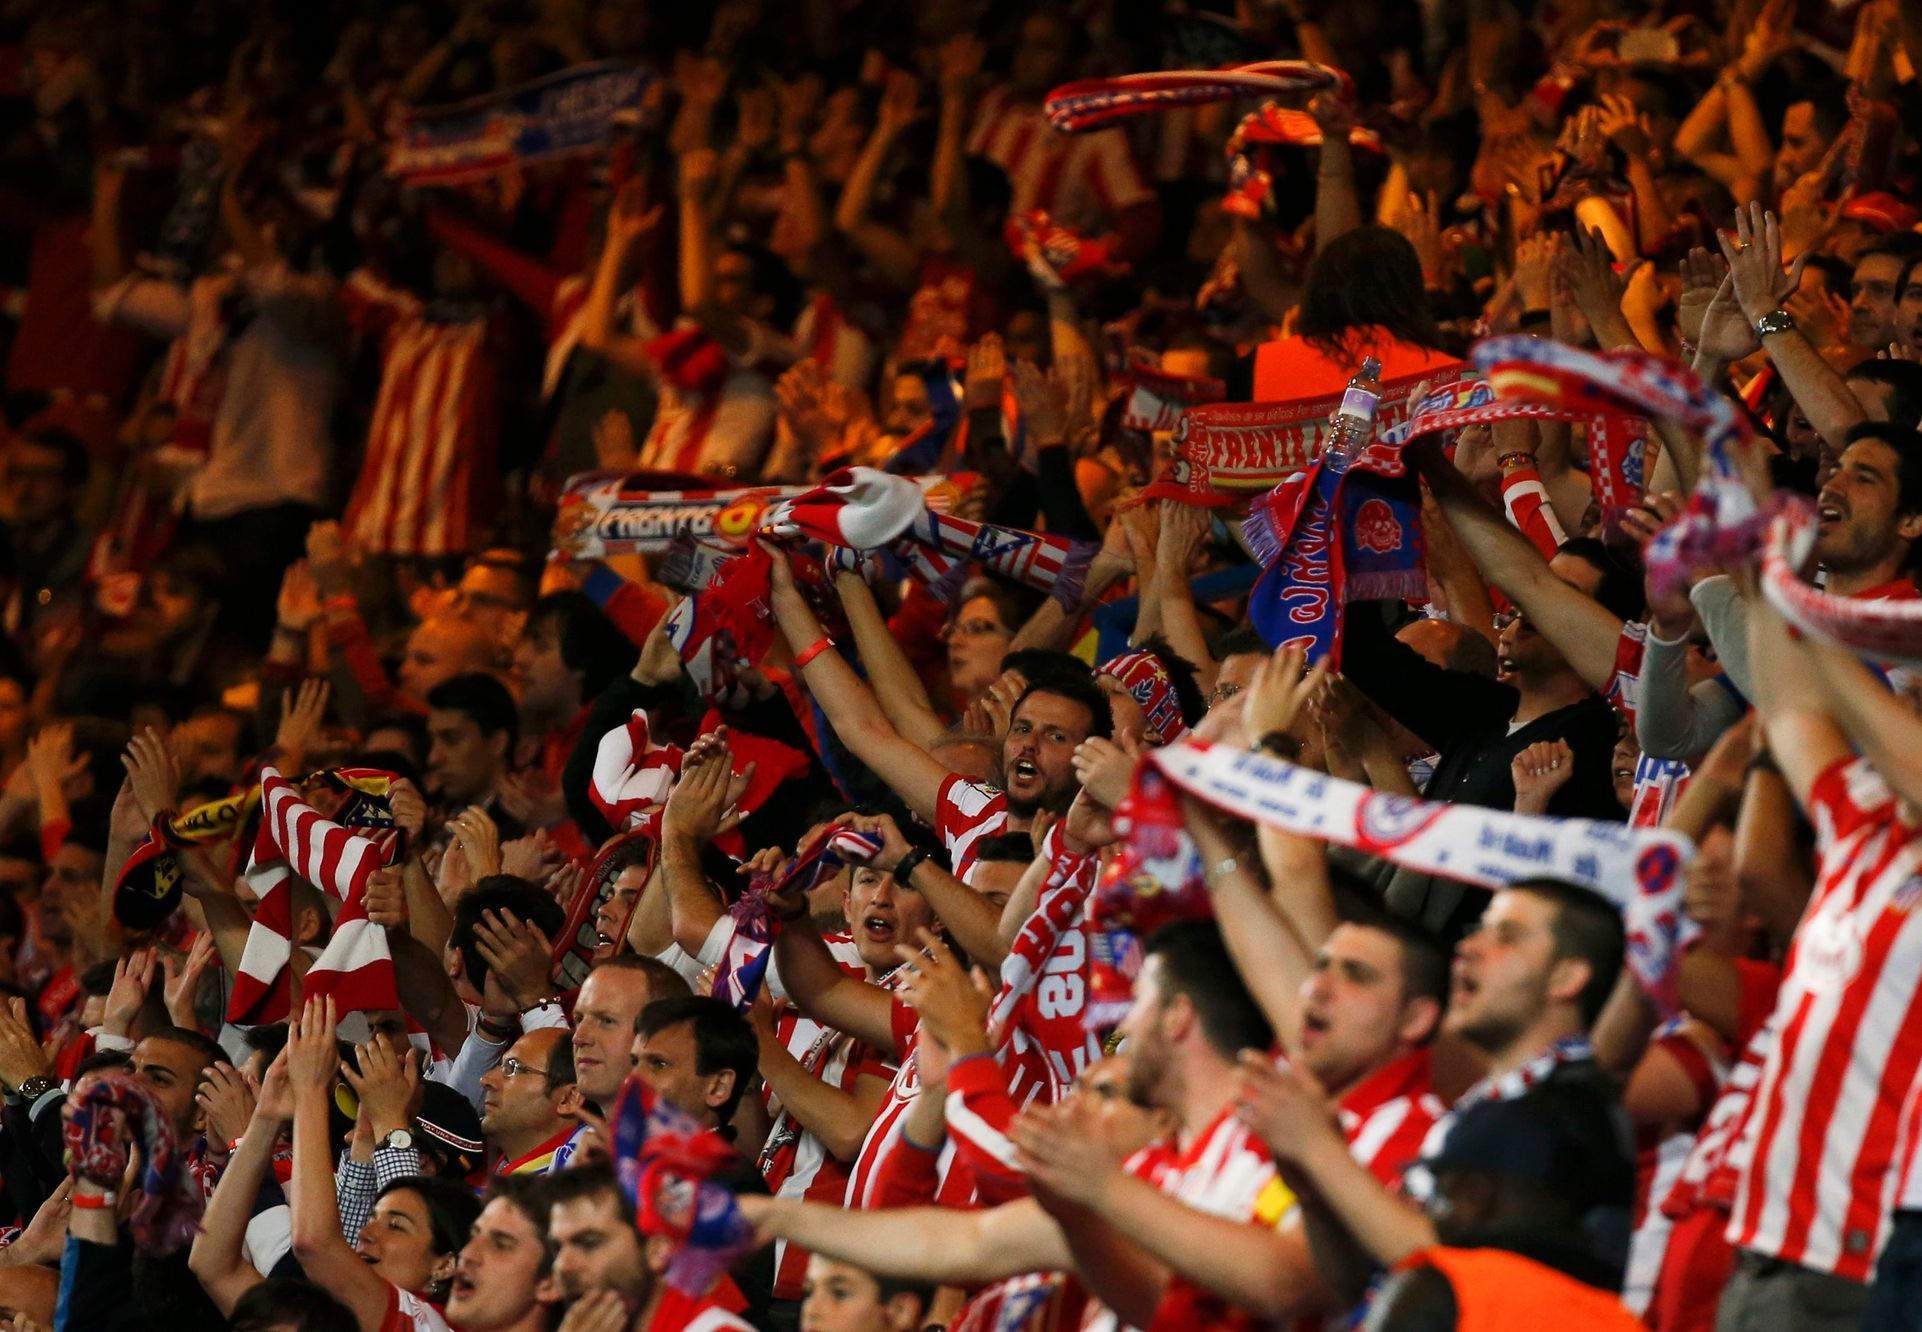 Atletico's supporters cheer during their Champions League semi-final second leg soccer match against Chelsea at Stamford Bridge in London